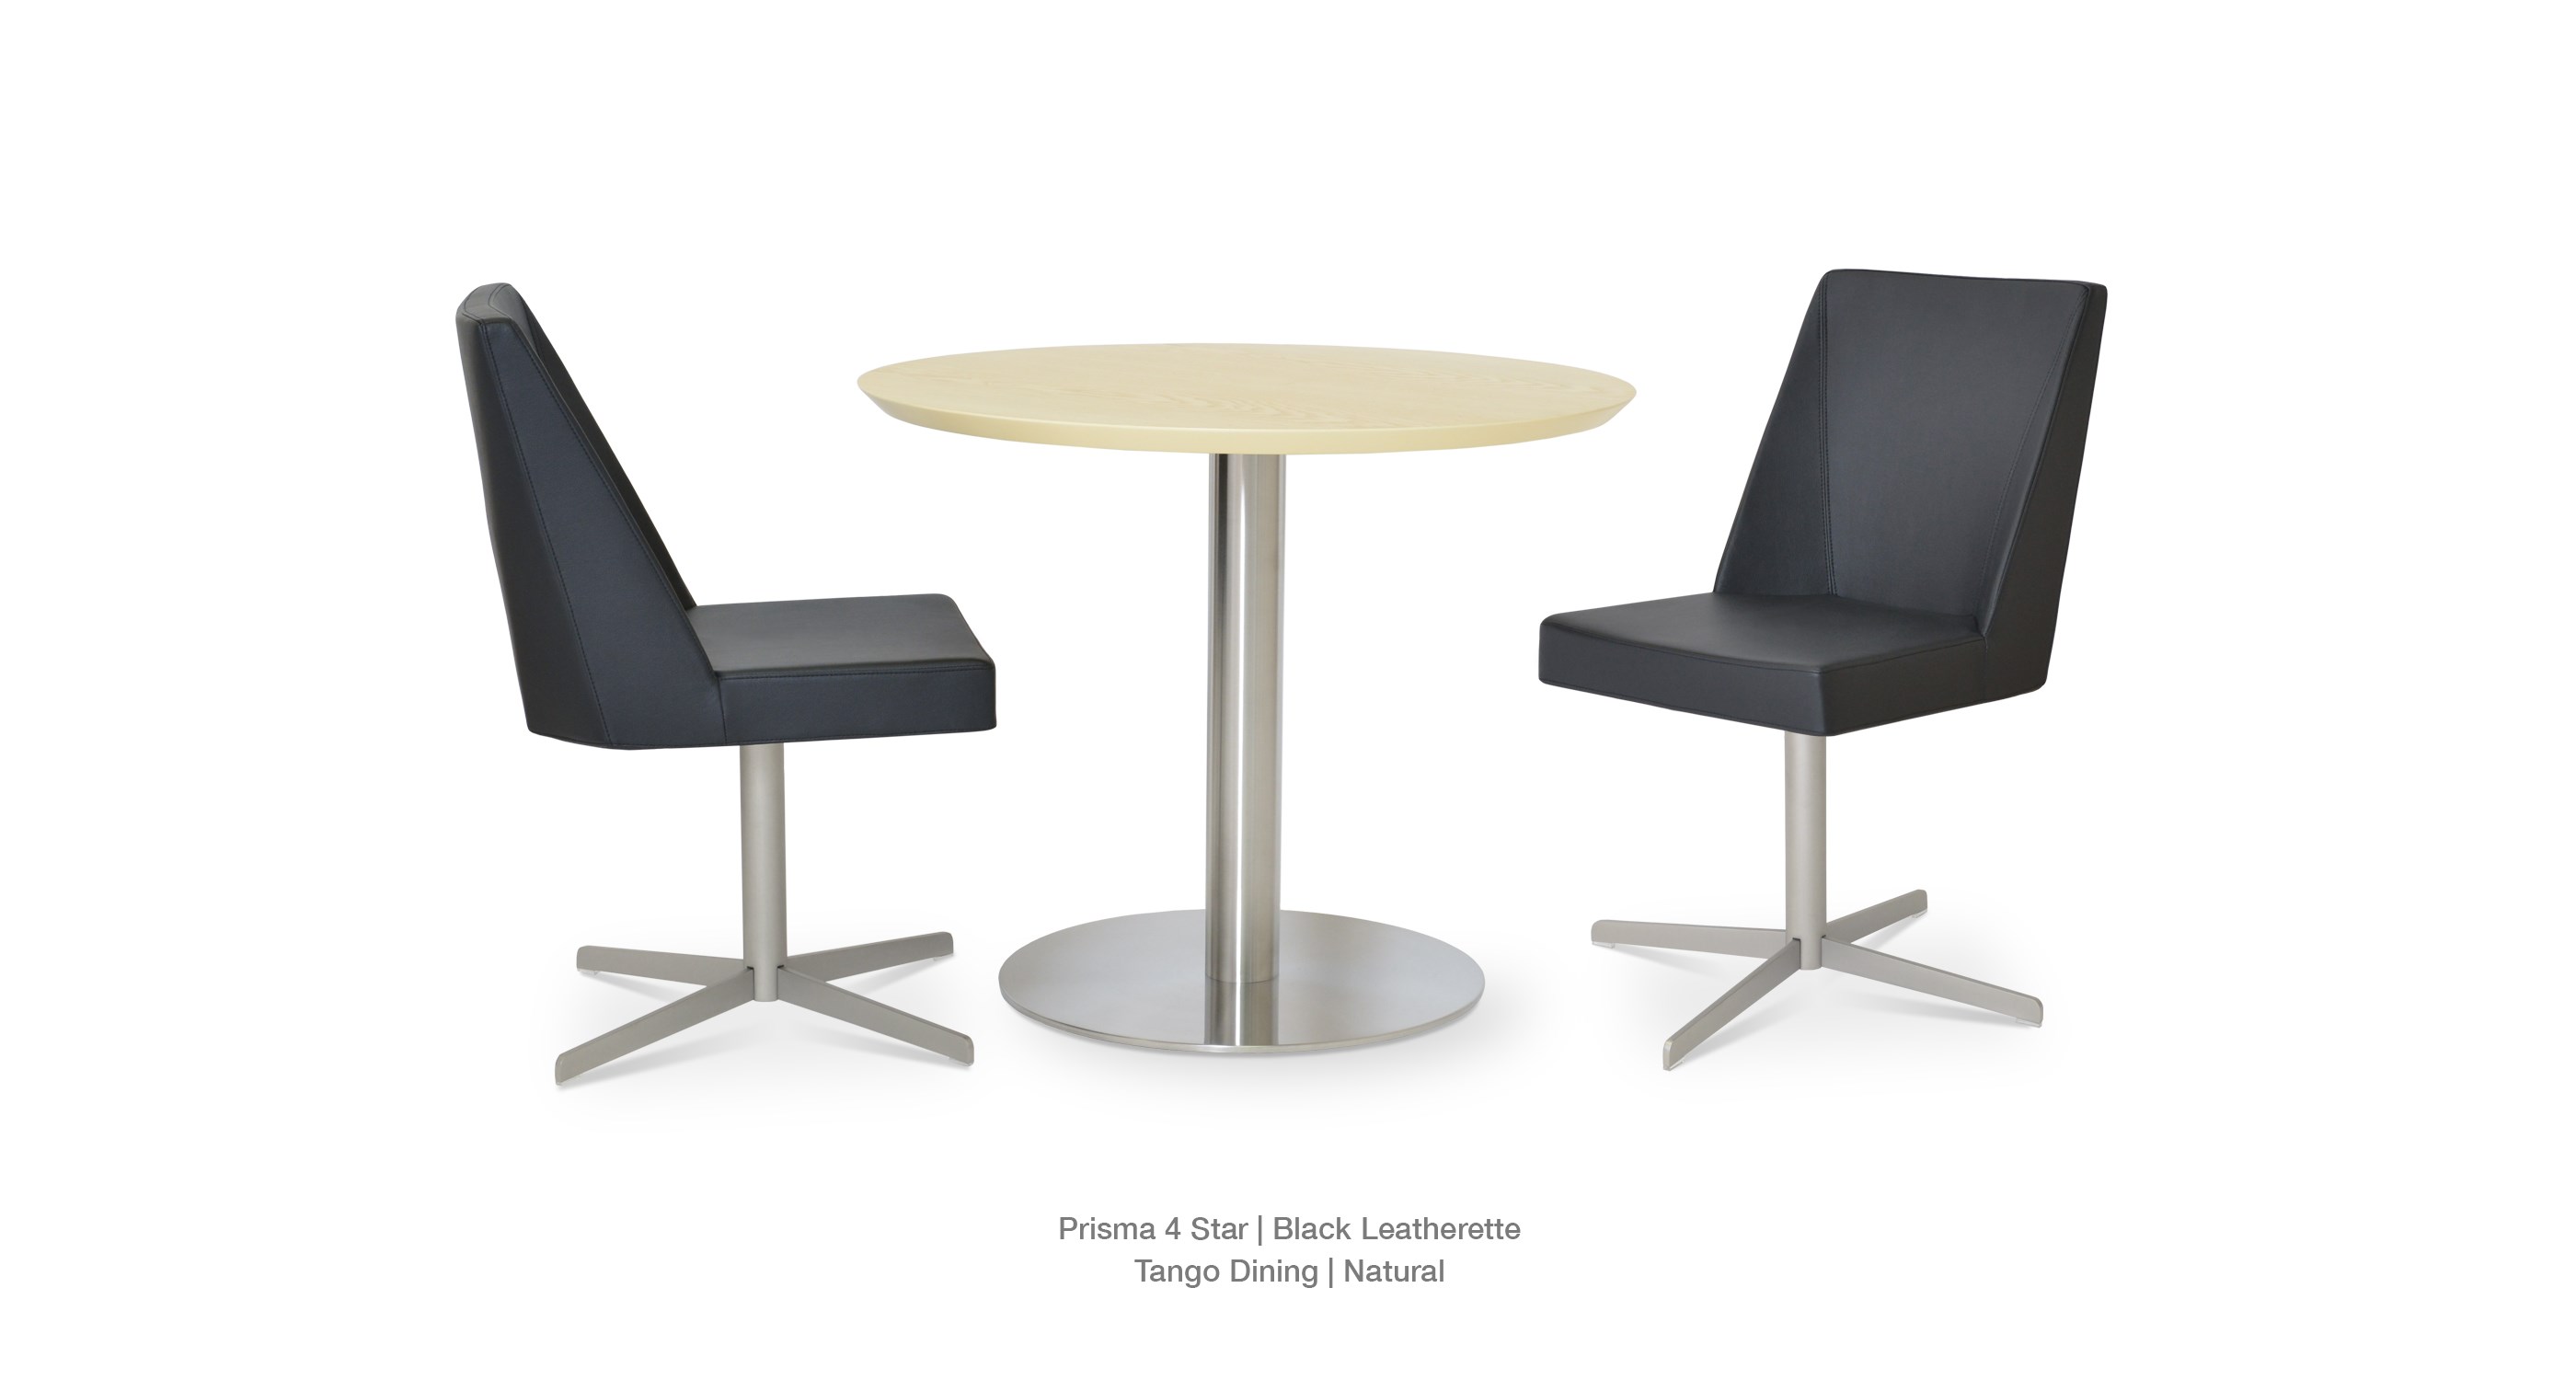 Tango 4 Star Black Leatherette and  Tango Dining Table